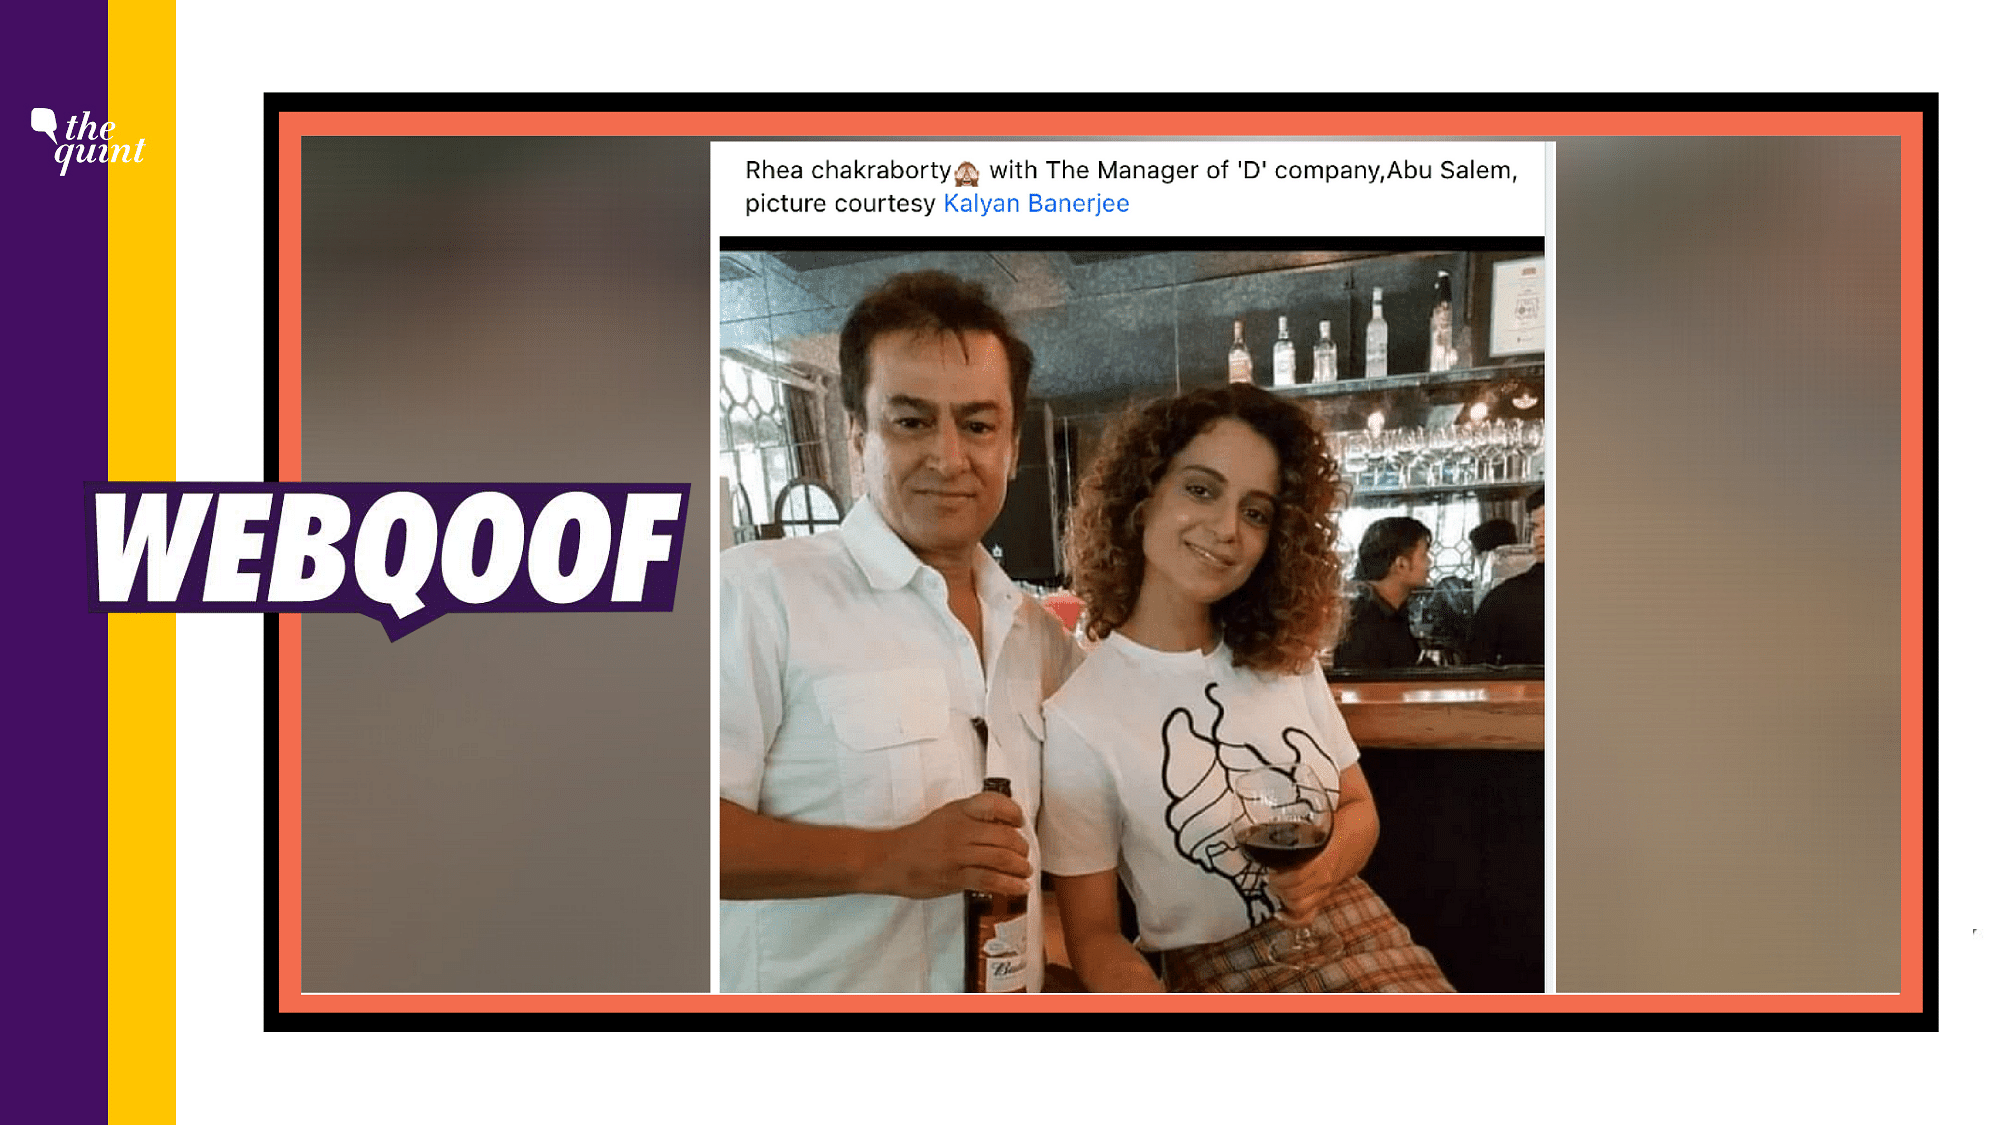 A photograph of Bollywood actor Kangana Ranaut with senior journalist Mark Manuel is being widely shared on social media with a claim that the actress was photographed with 1993 Mumbai blast <a href="https://www.thequint.com/news/india/who-is-abu-salem">convict Abu Salem</a>.